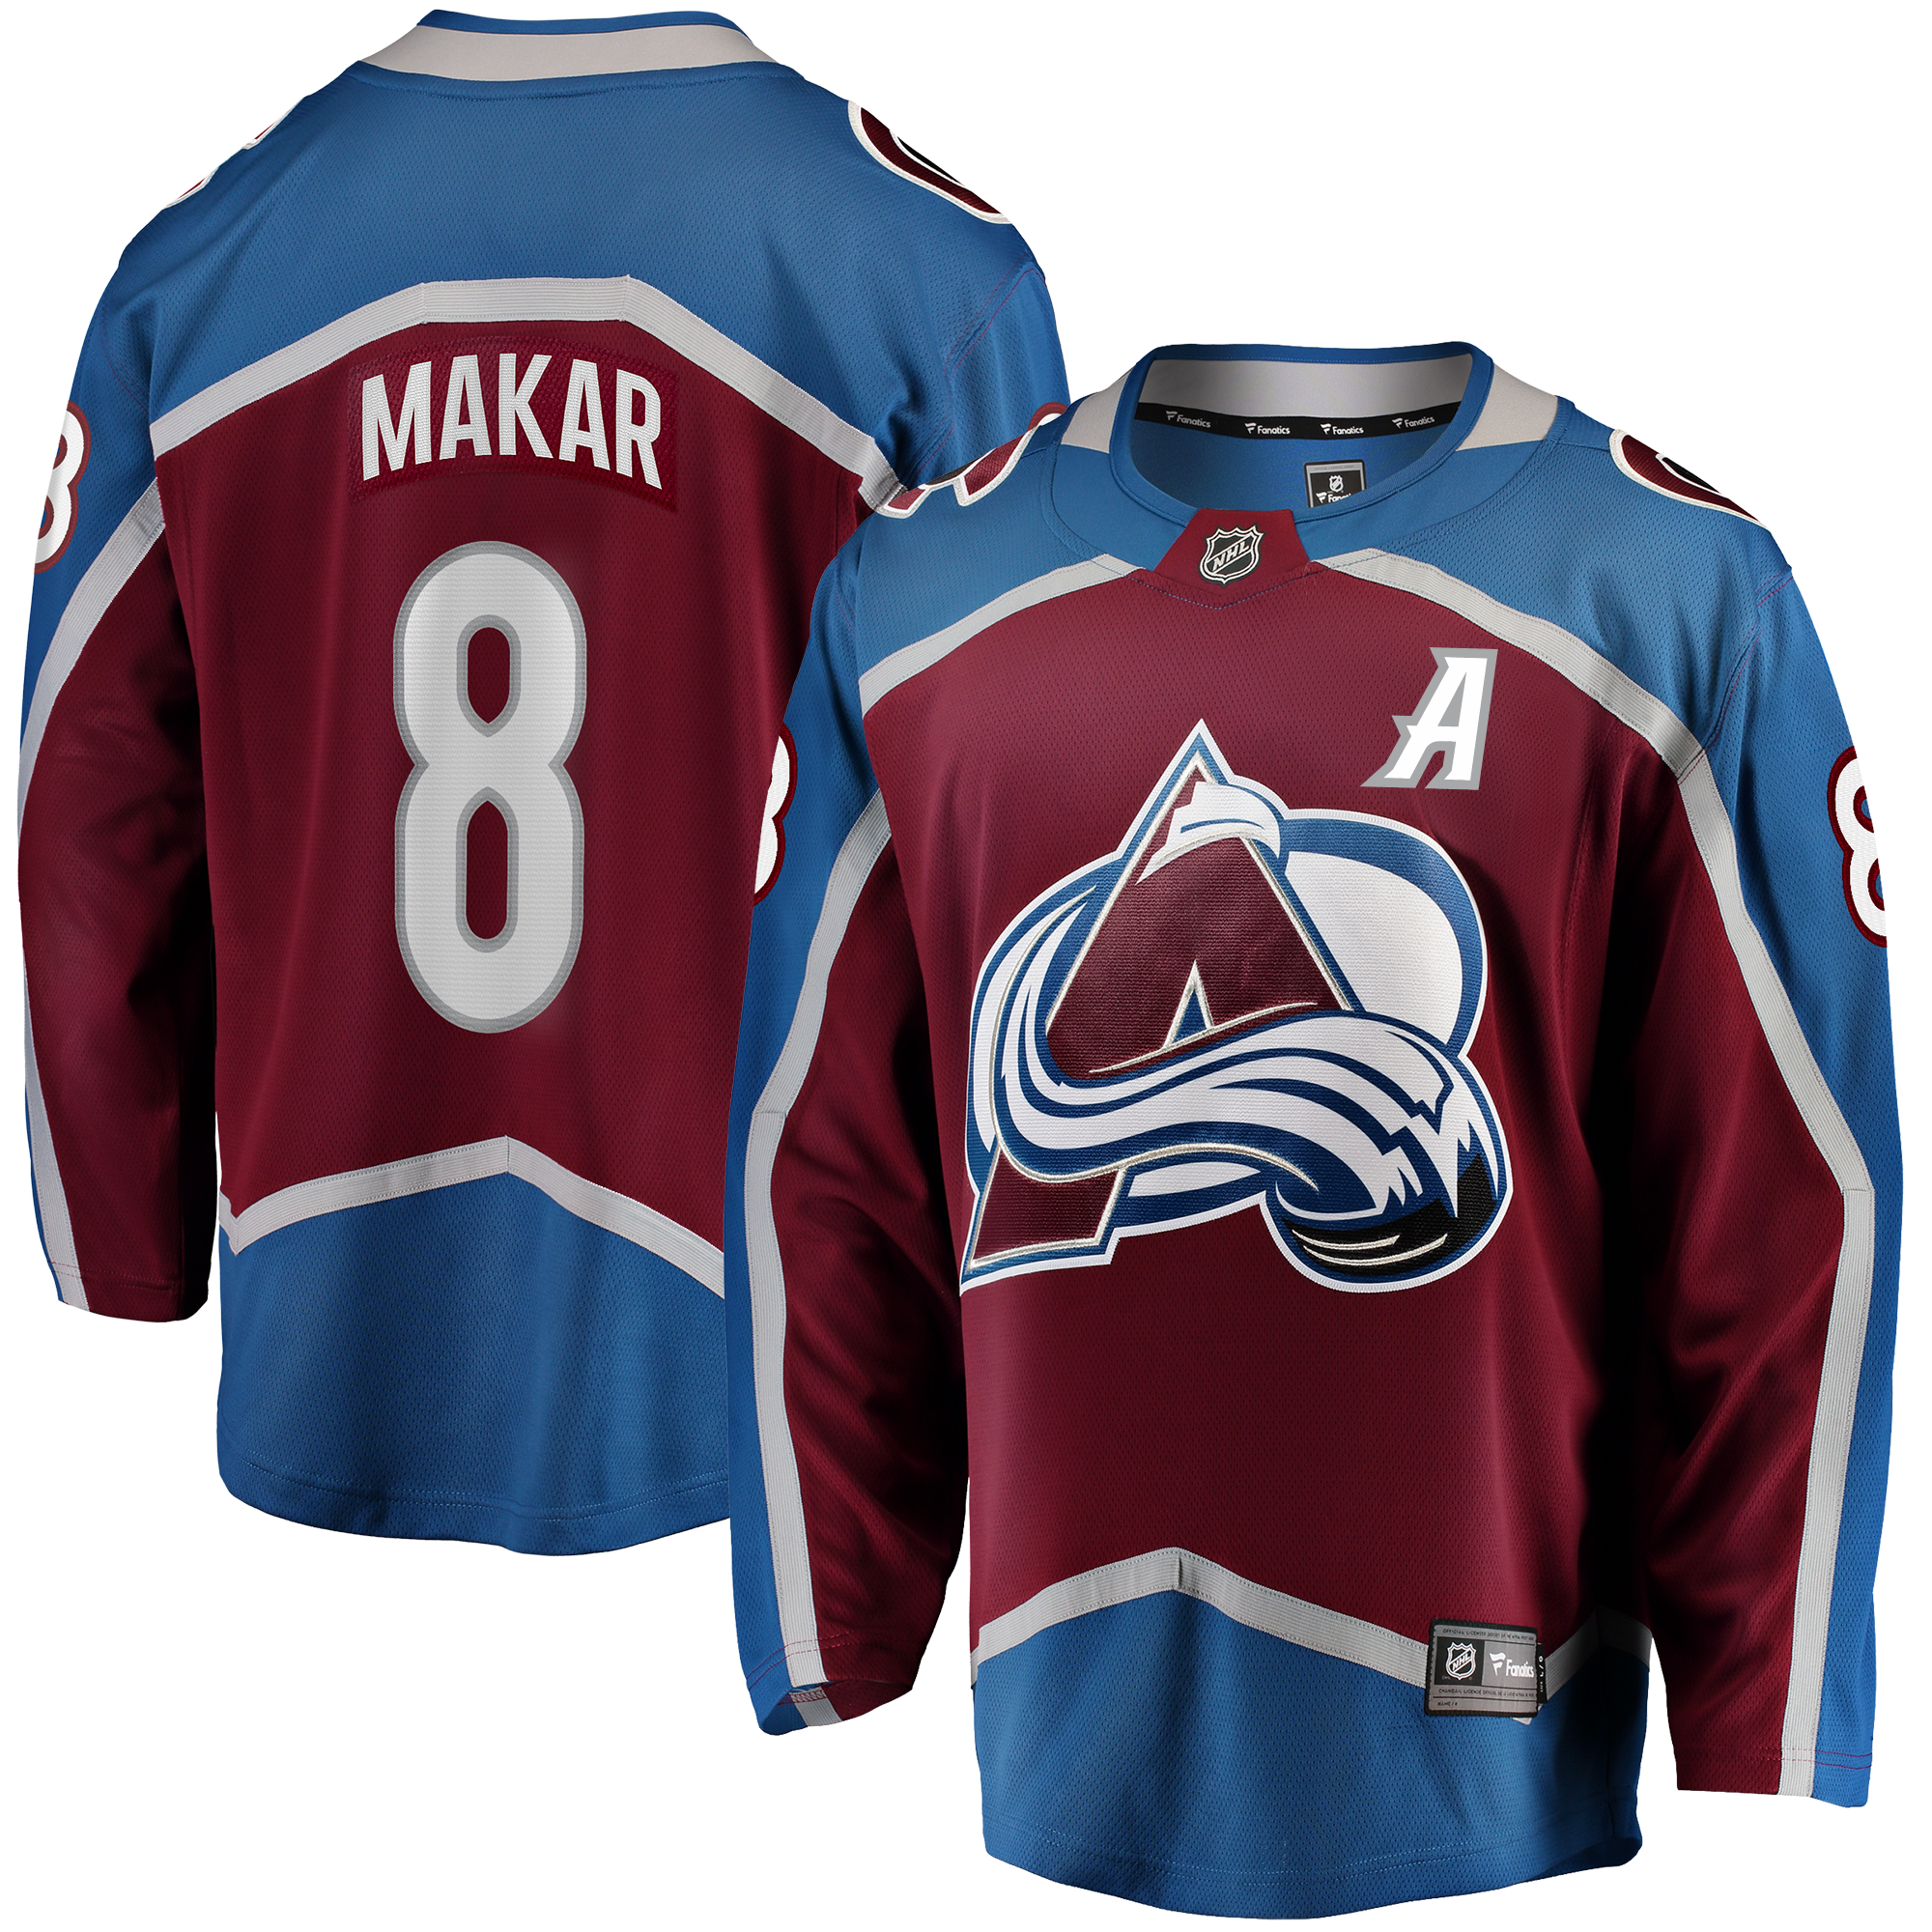 Colorado Avalanche Game Used NHL Jerseys for sale